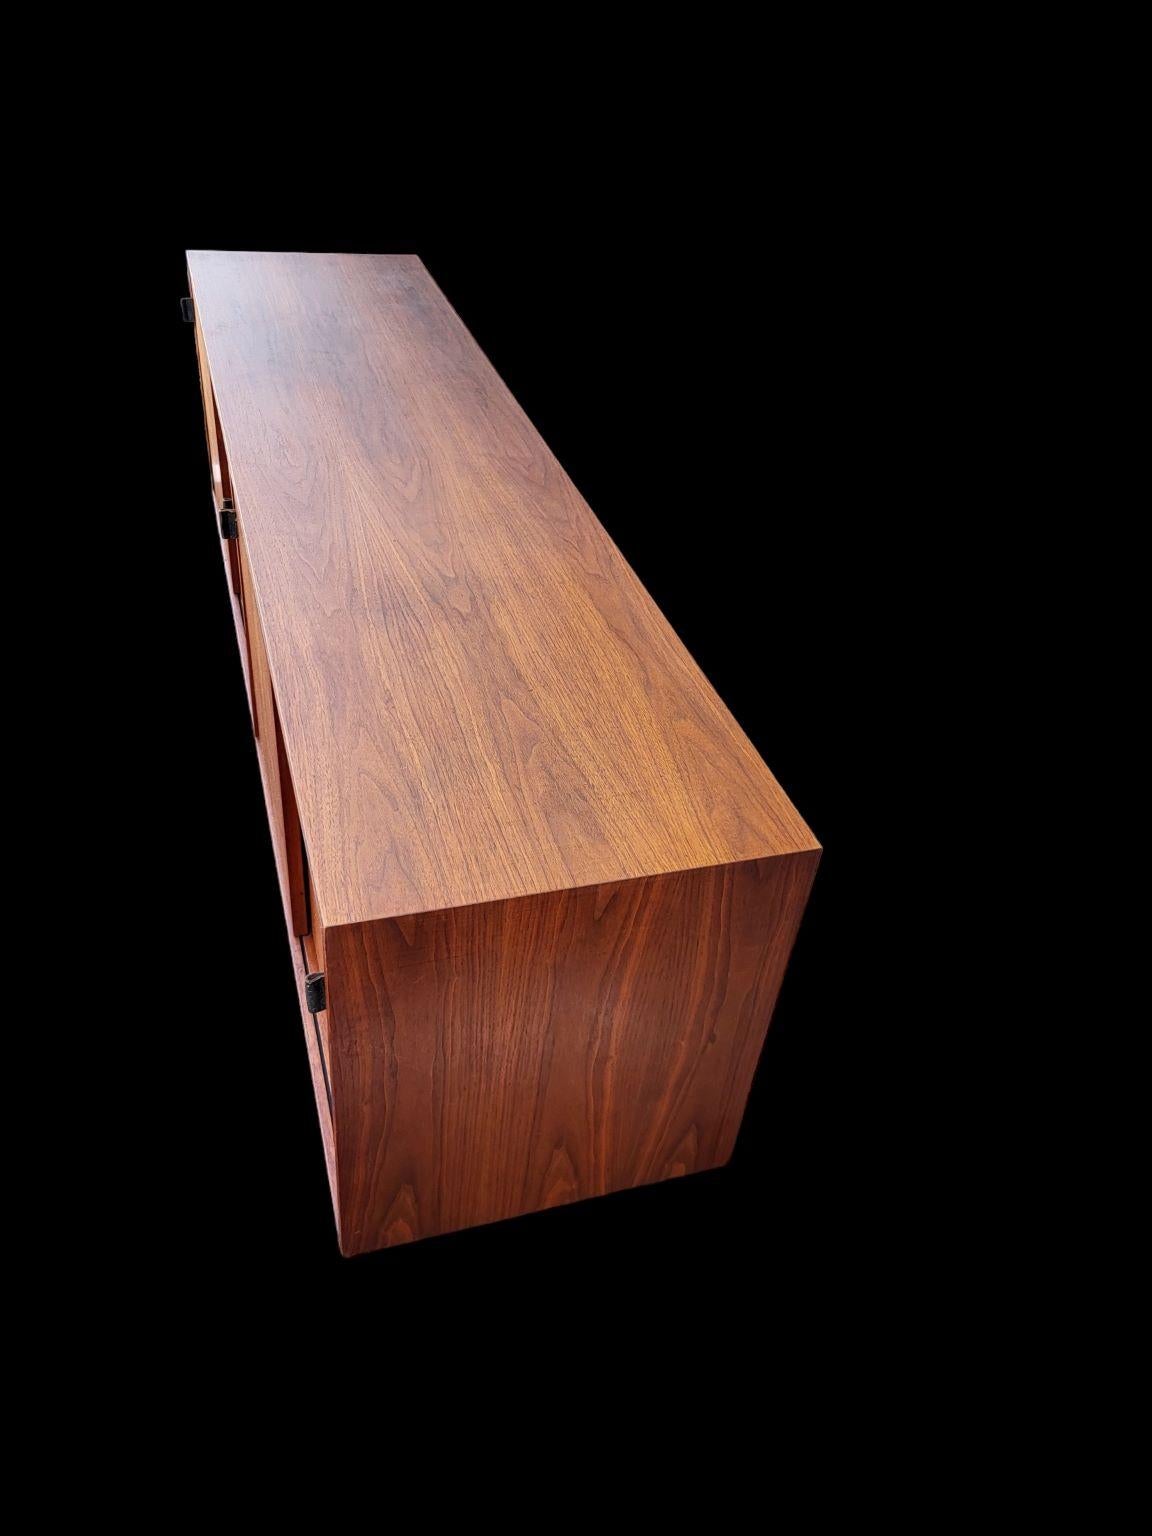 Florence Knoll For Knoll Mid Century Modern Credenza C.1963 For Sale 3